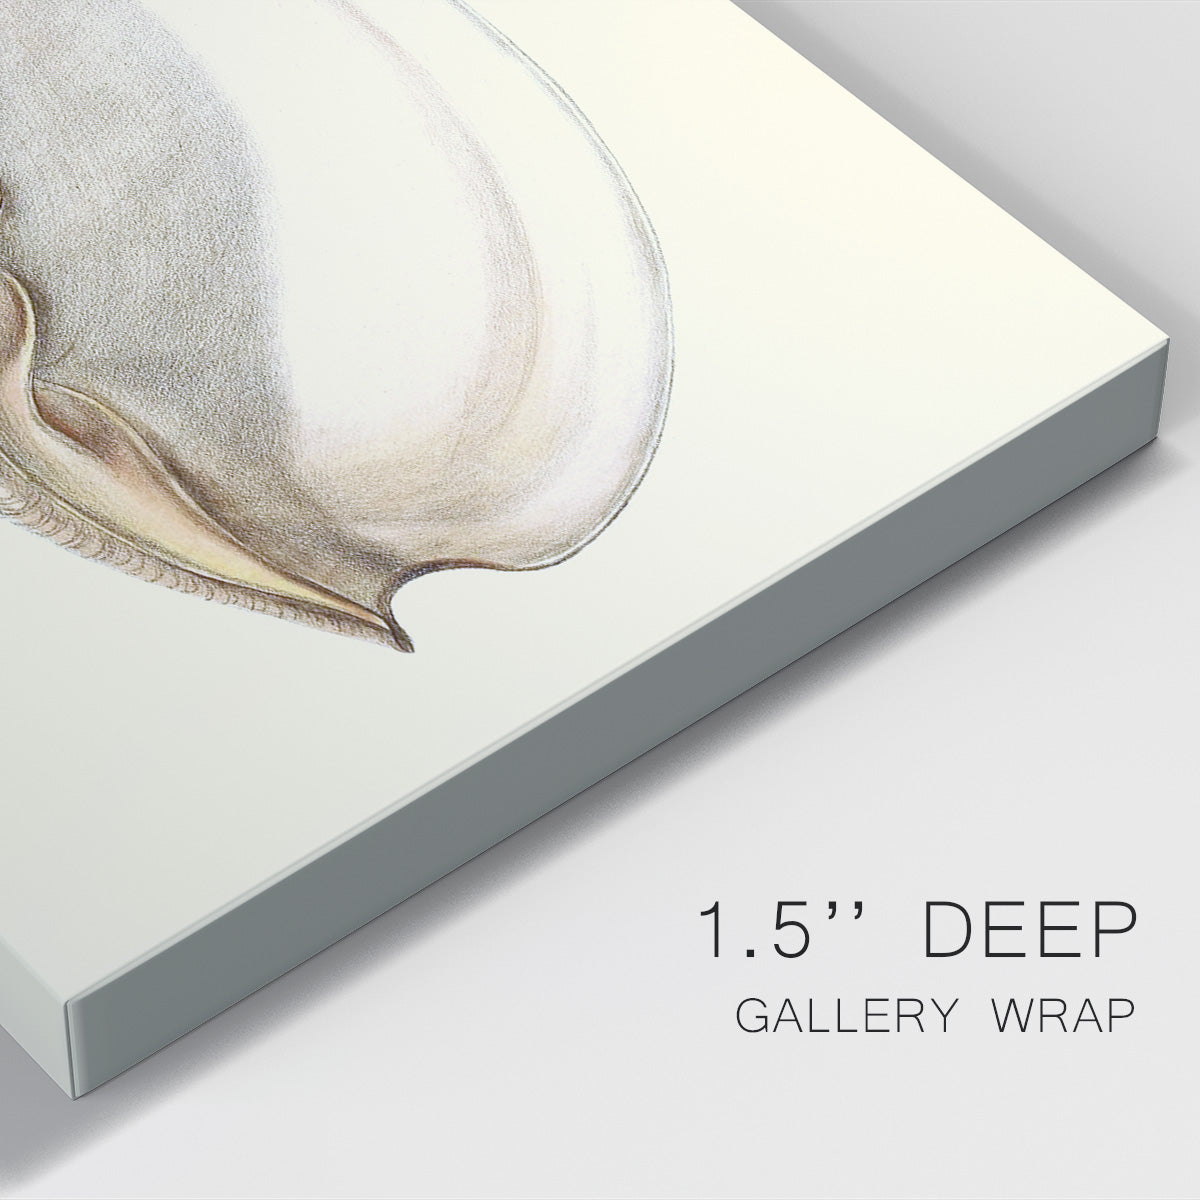 Splendid Shells IV Premium Gallery Wrapped Canvas - Ready to Hang